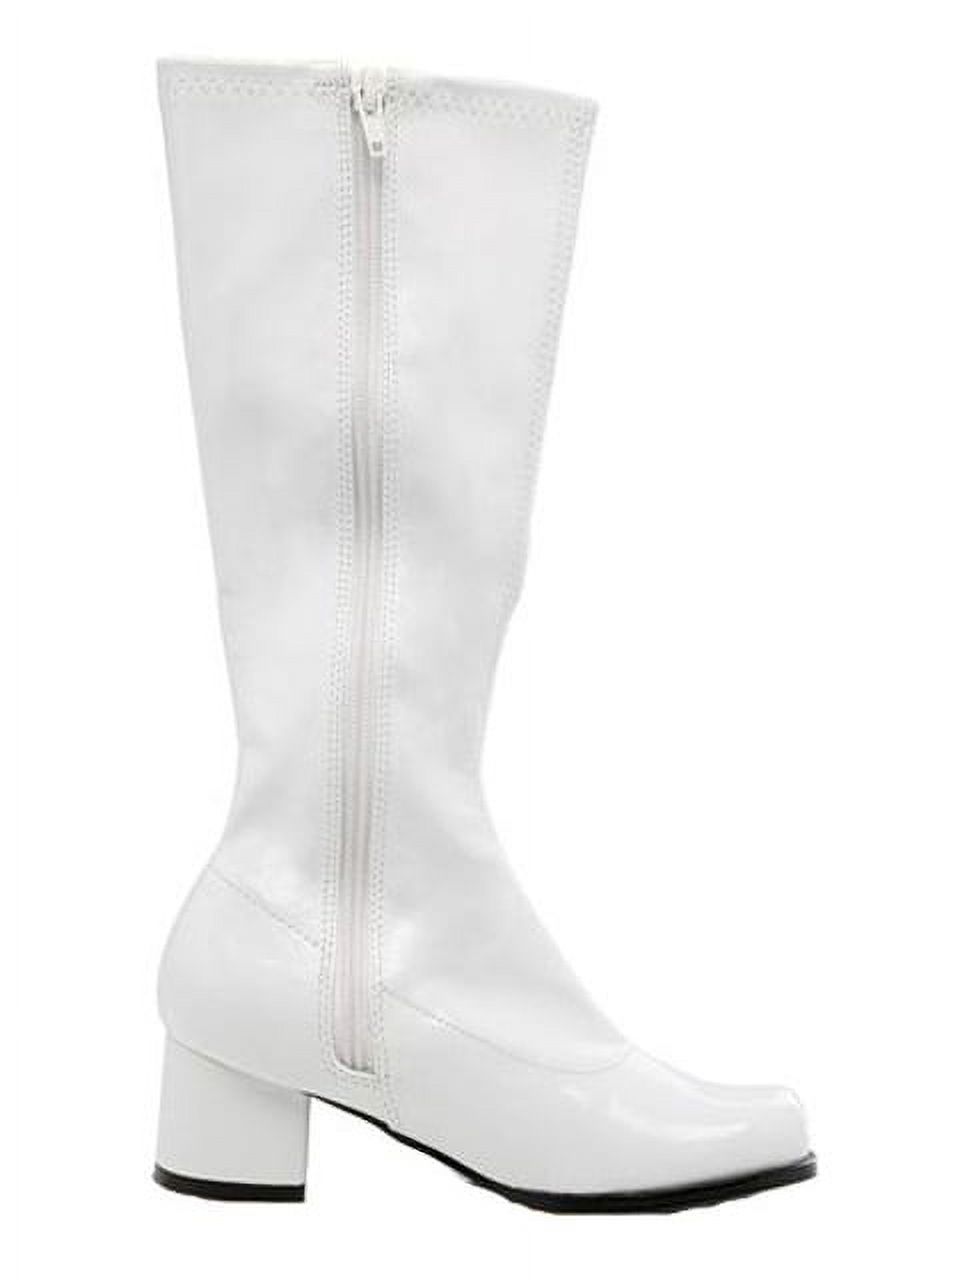 White Dora Go-Go Boots for Girls, Halloween Costume Accessories, 13-1 Shoe Size - image 1 of 2